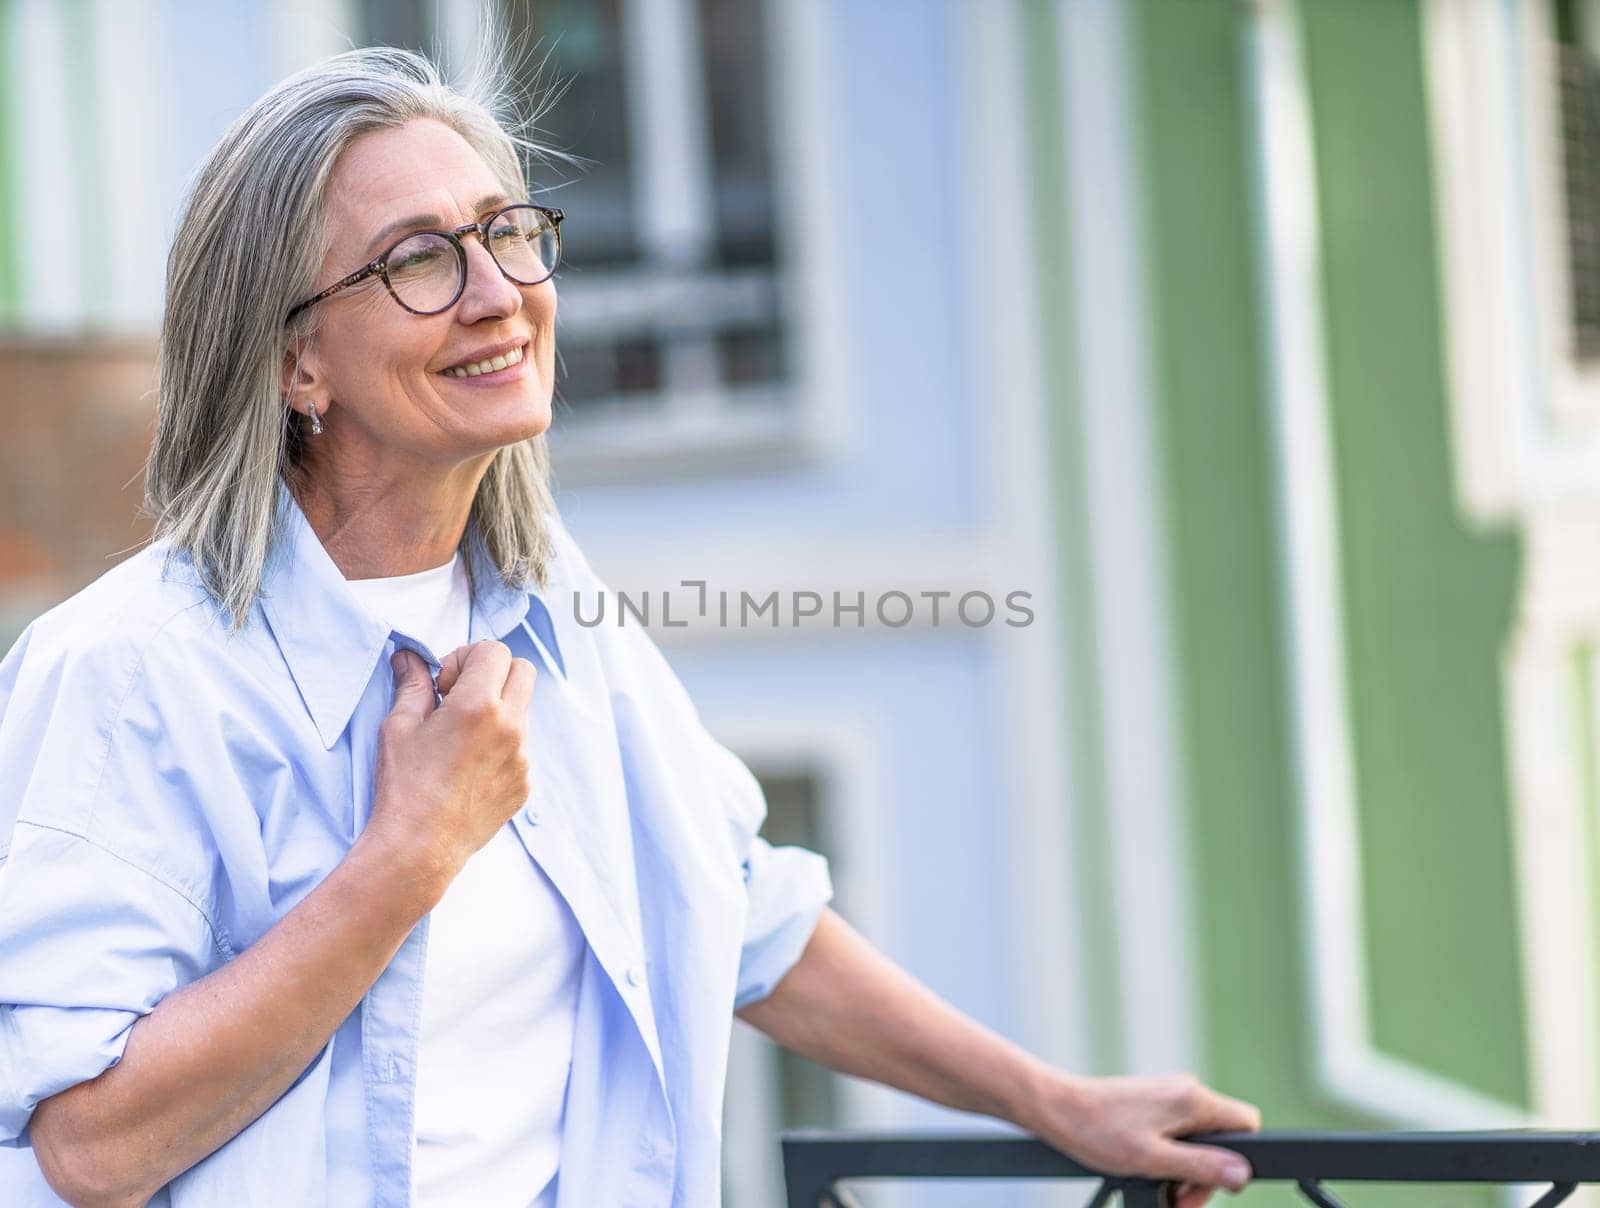 Concept of happiness with senior woman smiling with closed eyes in old city. Cheerful woman enjoying cityscape, outdoor, travel, tourism, vacation, leisure, relaxation, serenity, and calm atmosphere. High quality photo